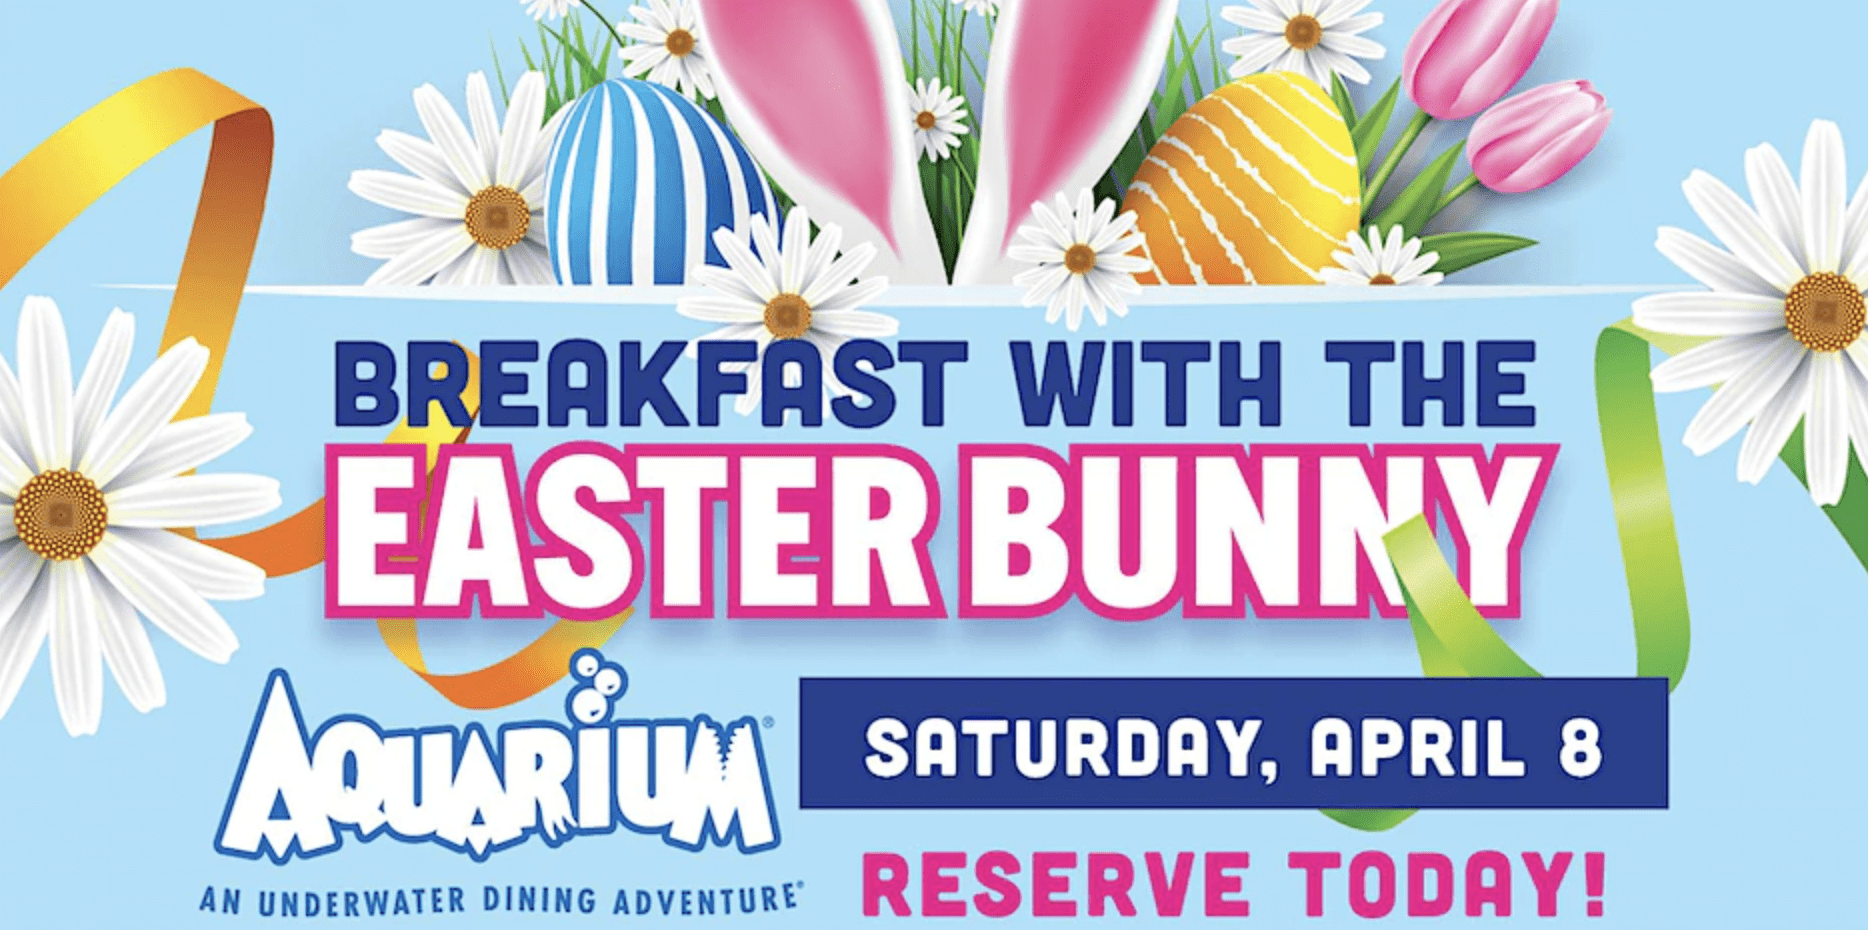 Breakfast with the Easter Bunny in Nashville at Aquarium Restaurant.